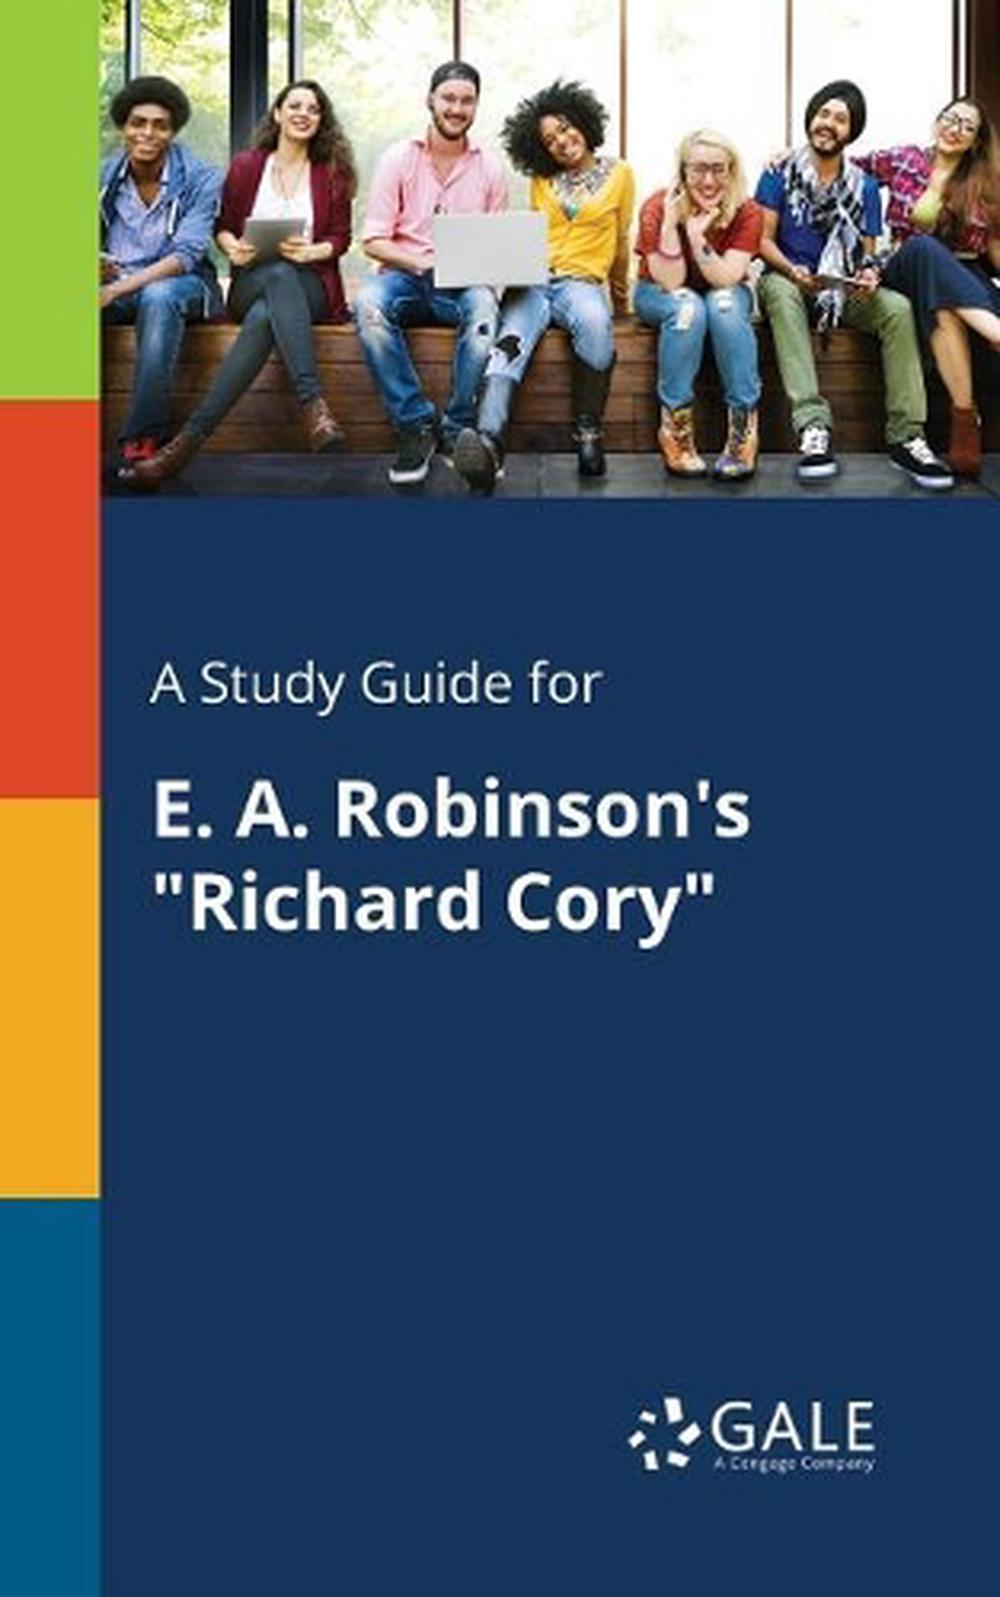 a-study-guide-for-e-a-robinson-s-richard-cory-by-cengage-learning-gale-engl-9781375387071